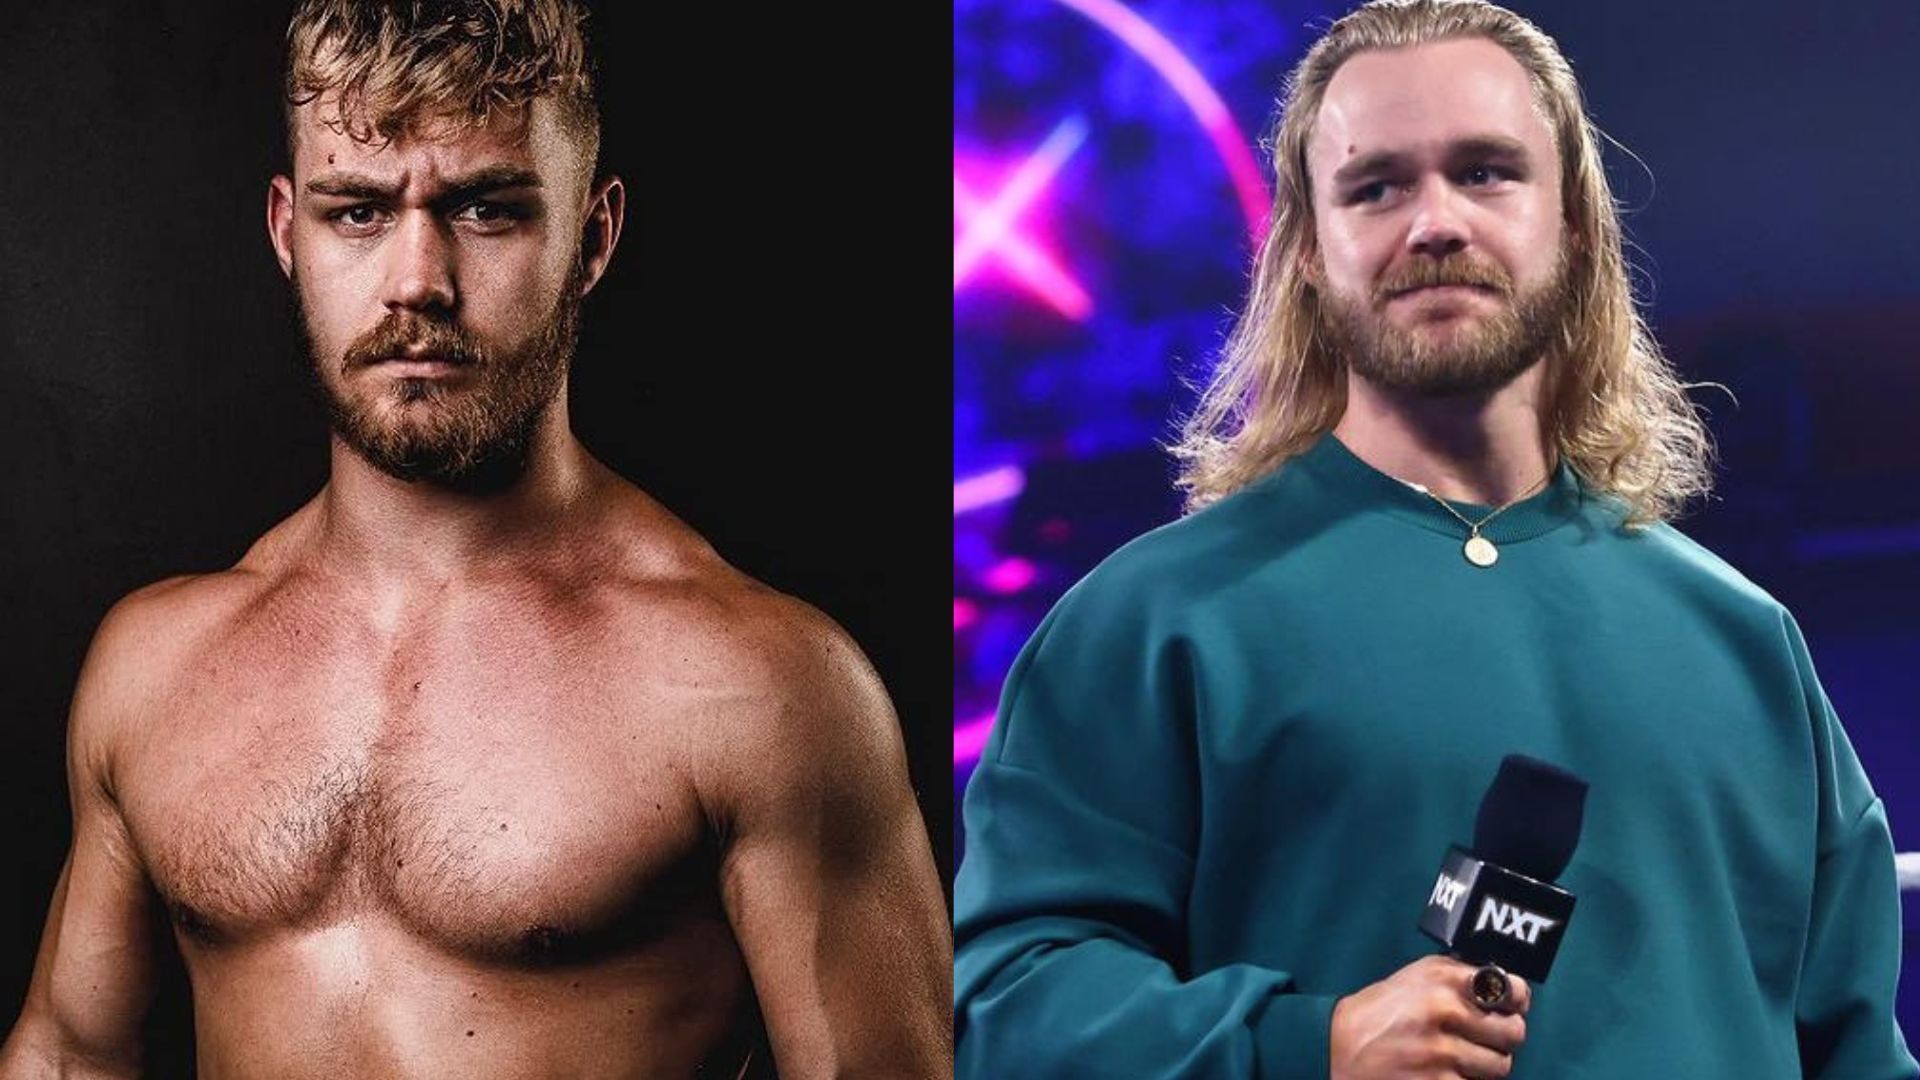 WWE NXT star Tyler Bate could join the main roster soon.